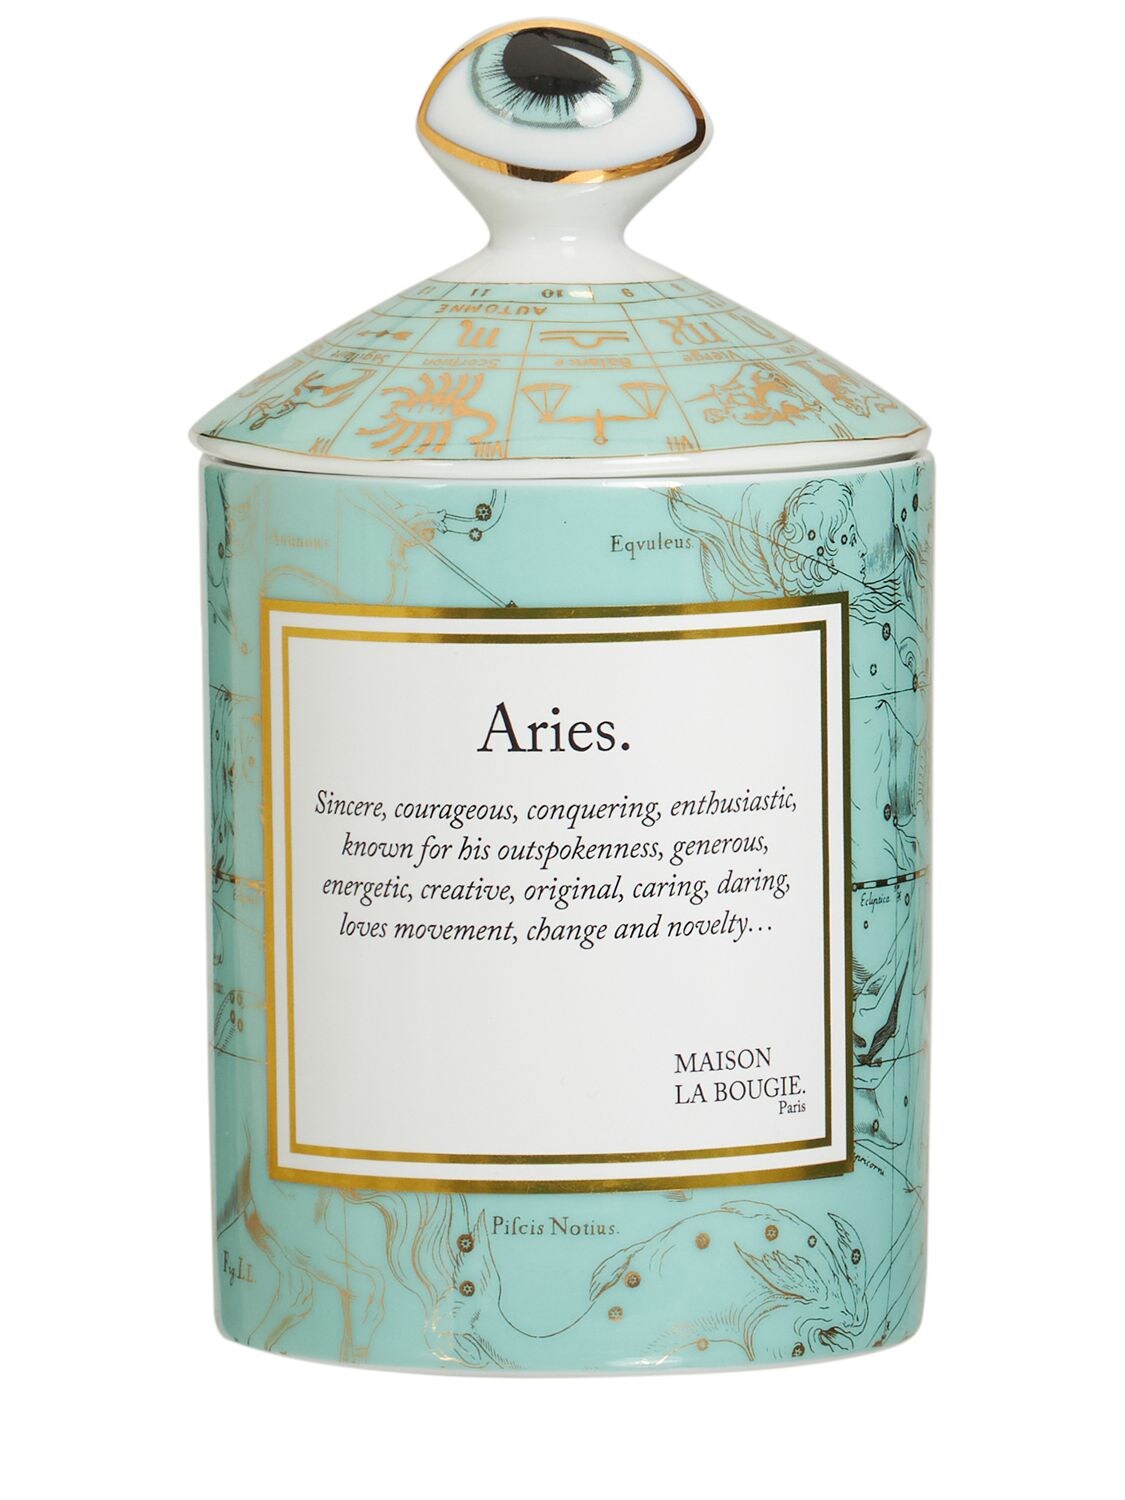 Maison La Bougie 350gr Aries Zodiac Scented Candle In Green